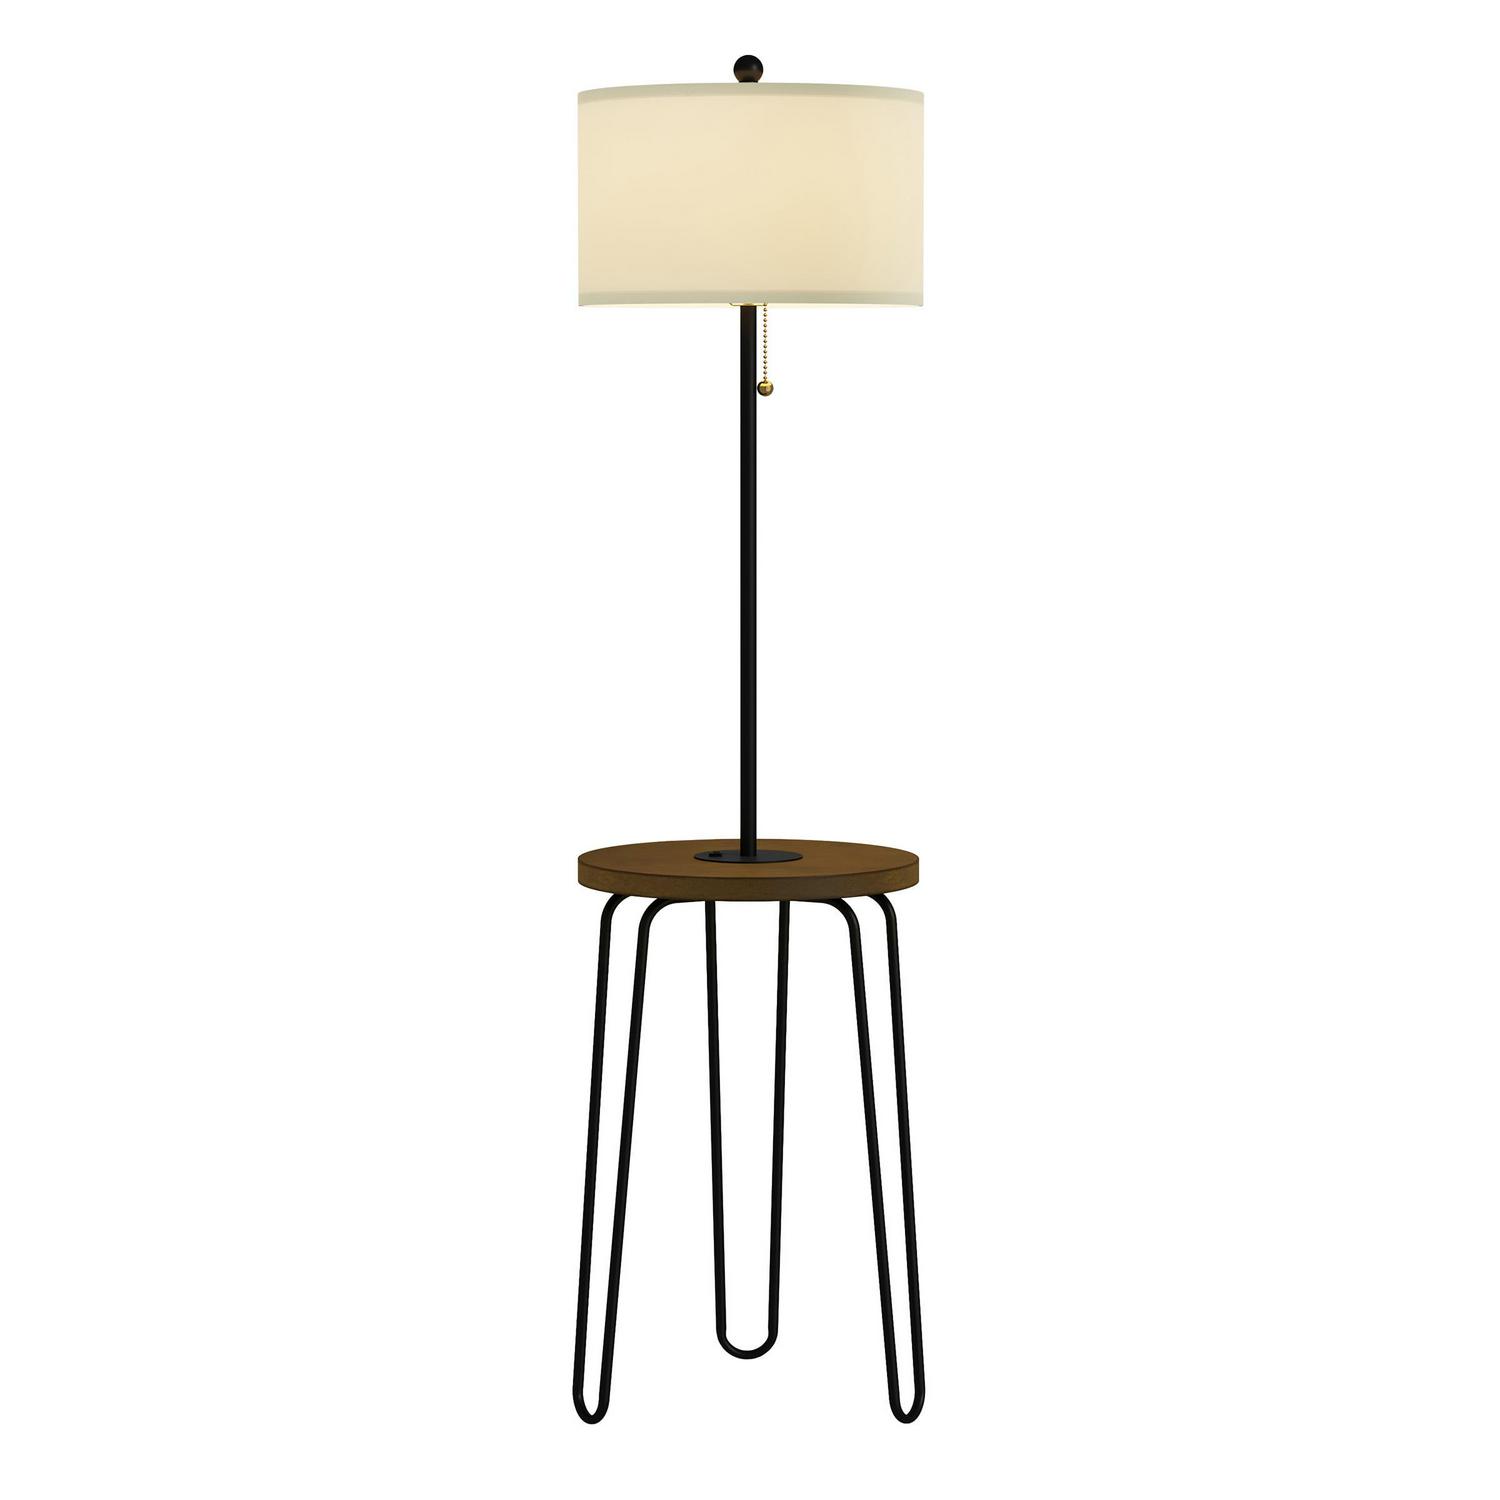 Lavish Home Floor Lamp with Table， USB Port， and Hairpin Legs a Standing Light with Shelves